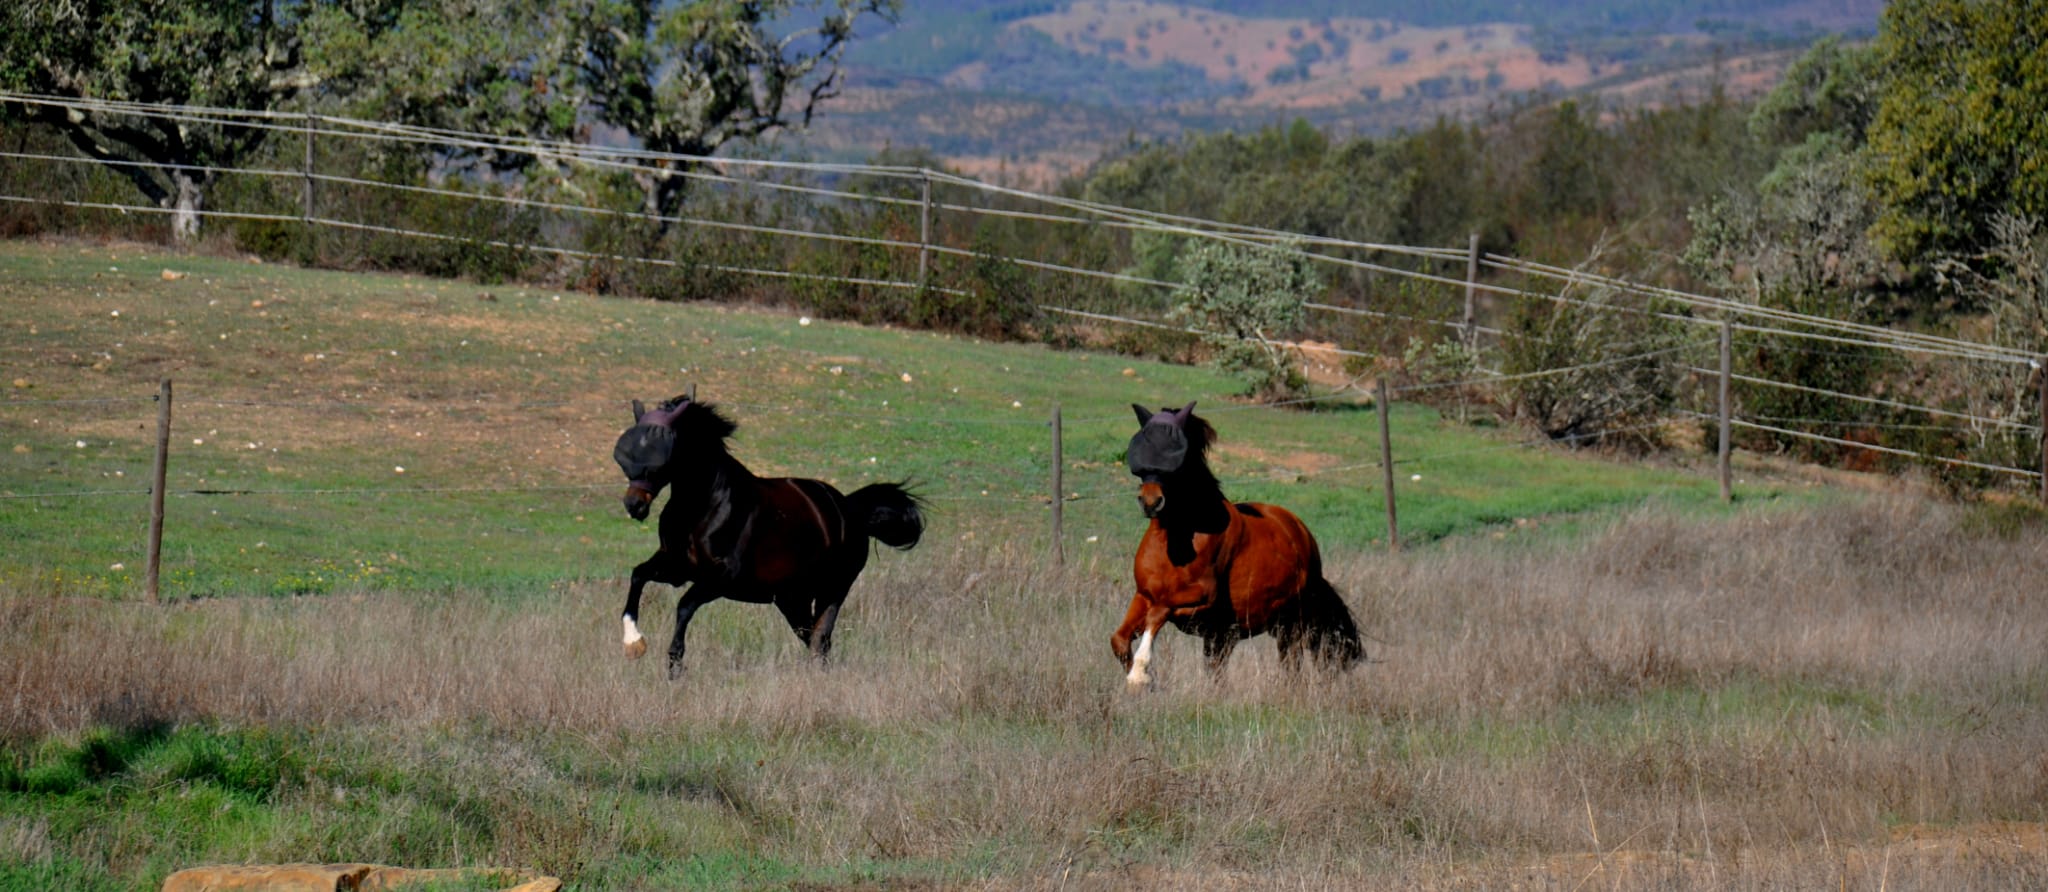 Two horses with flay masks running in a pasture